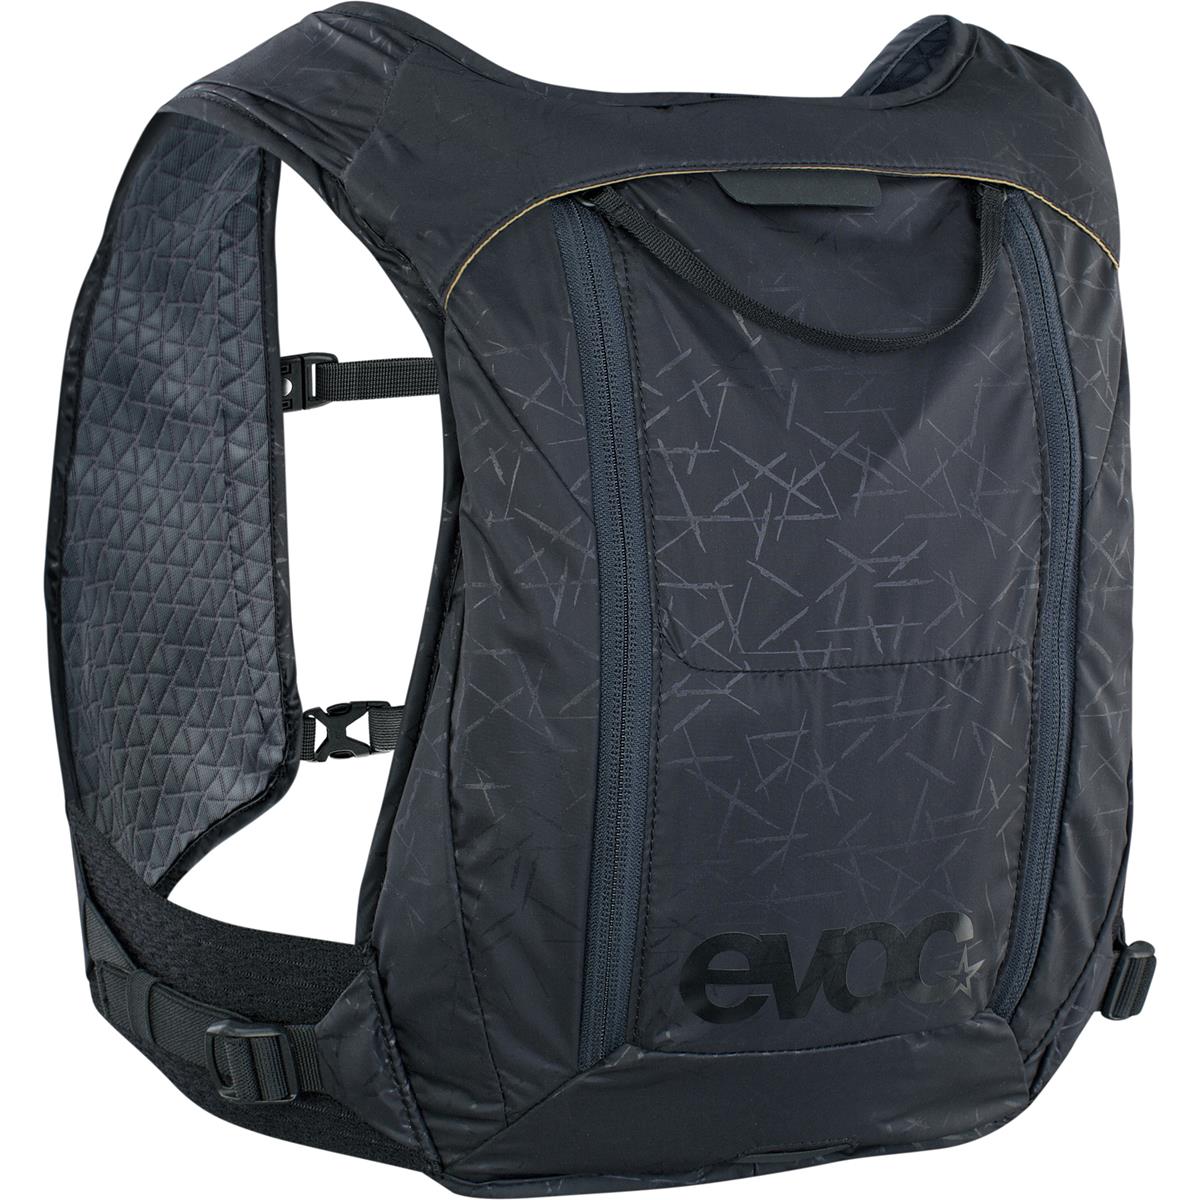 Evoc Backpack with Hydration System Compartment Hydro Pro 3 Black